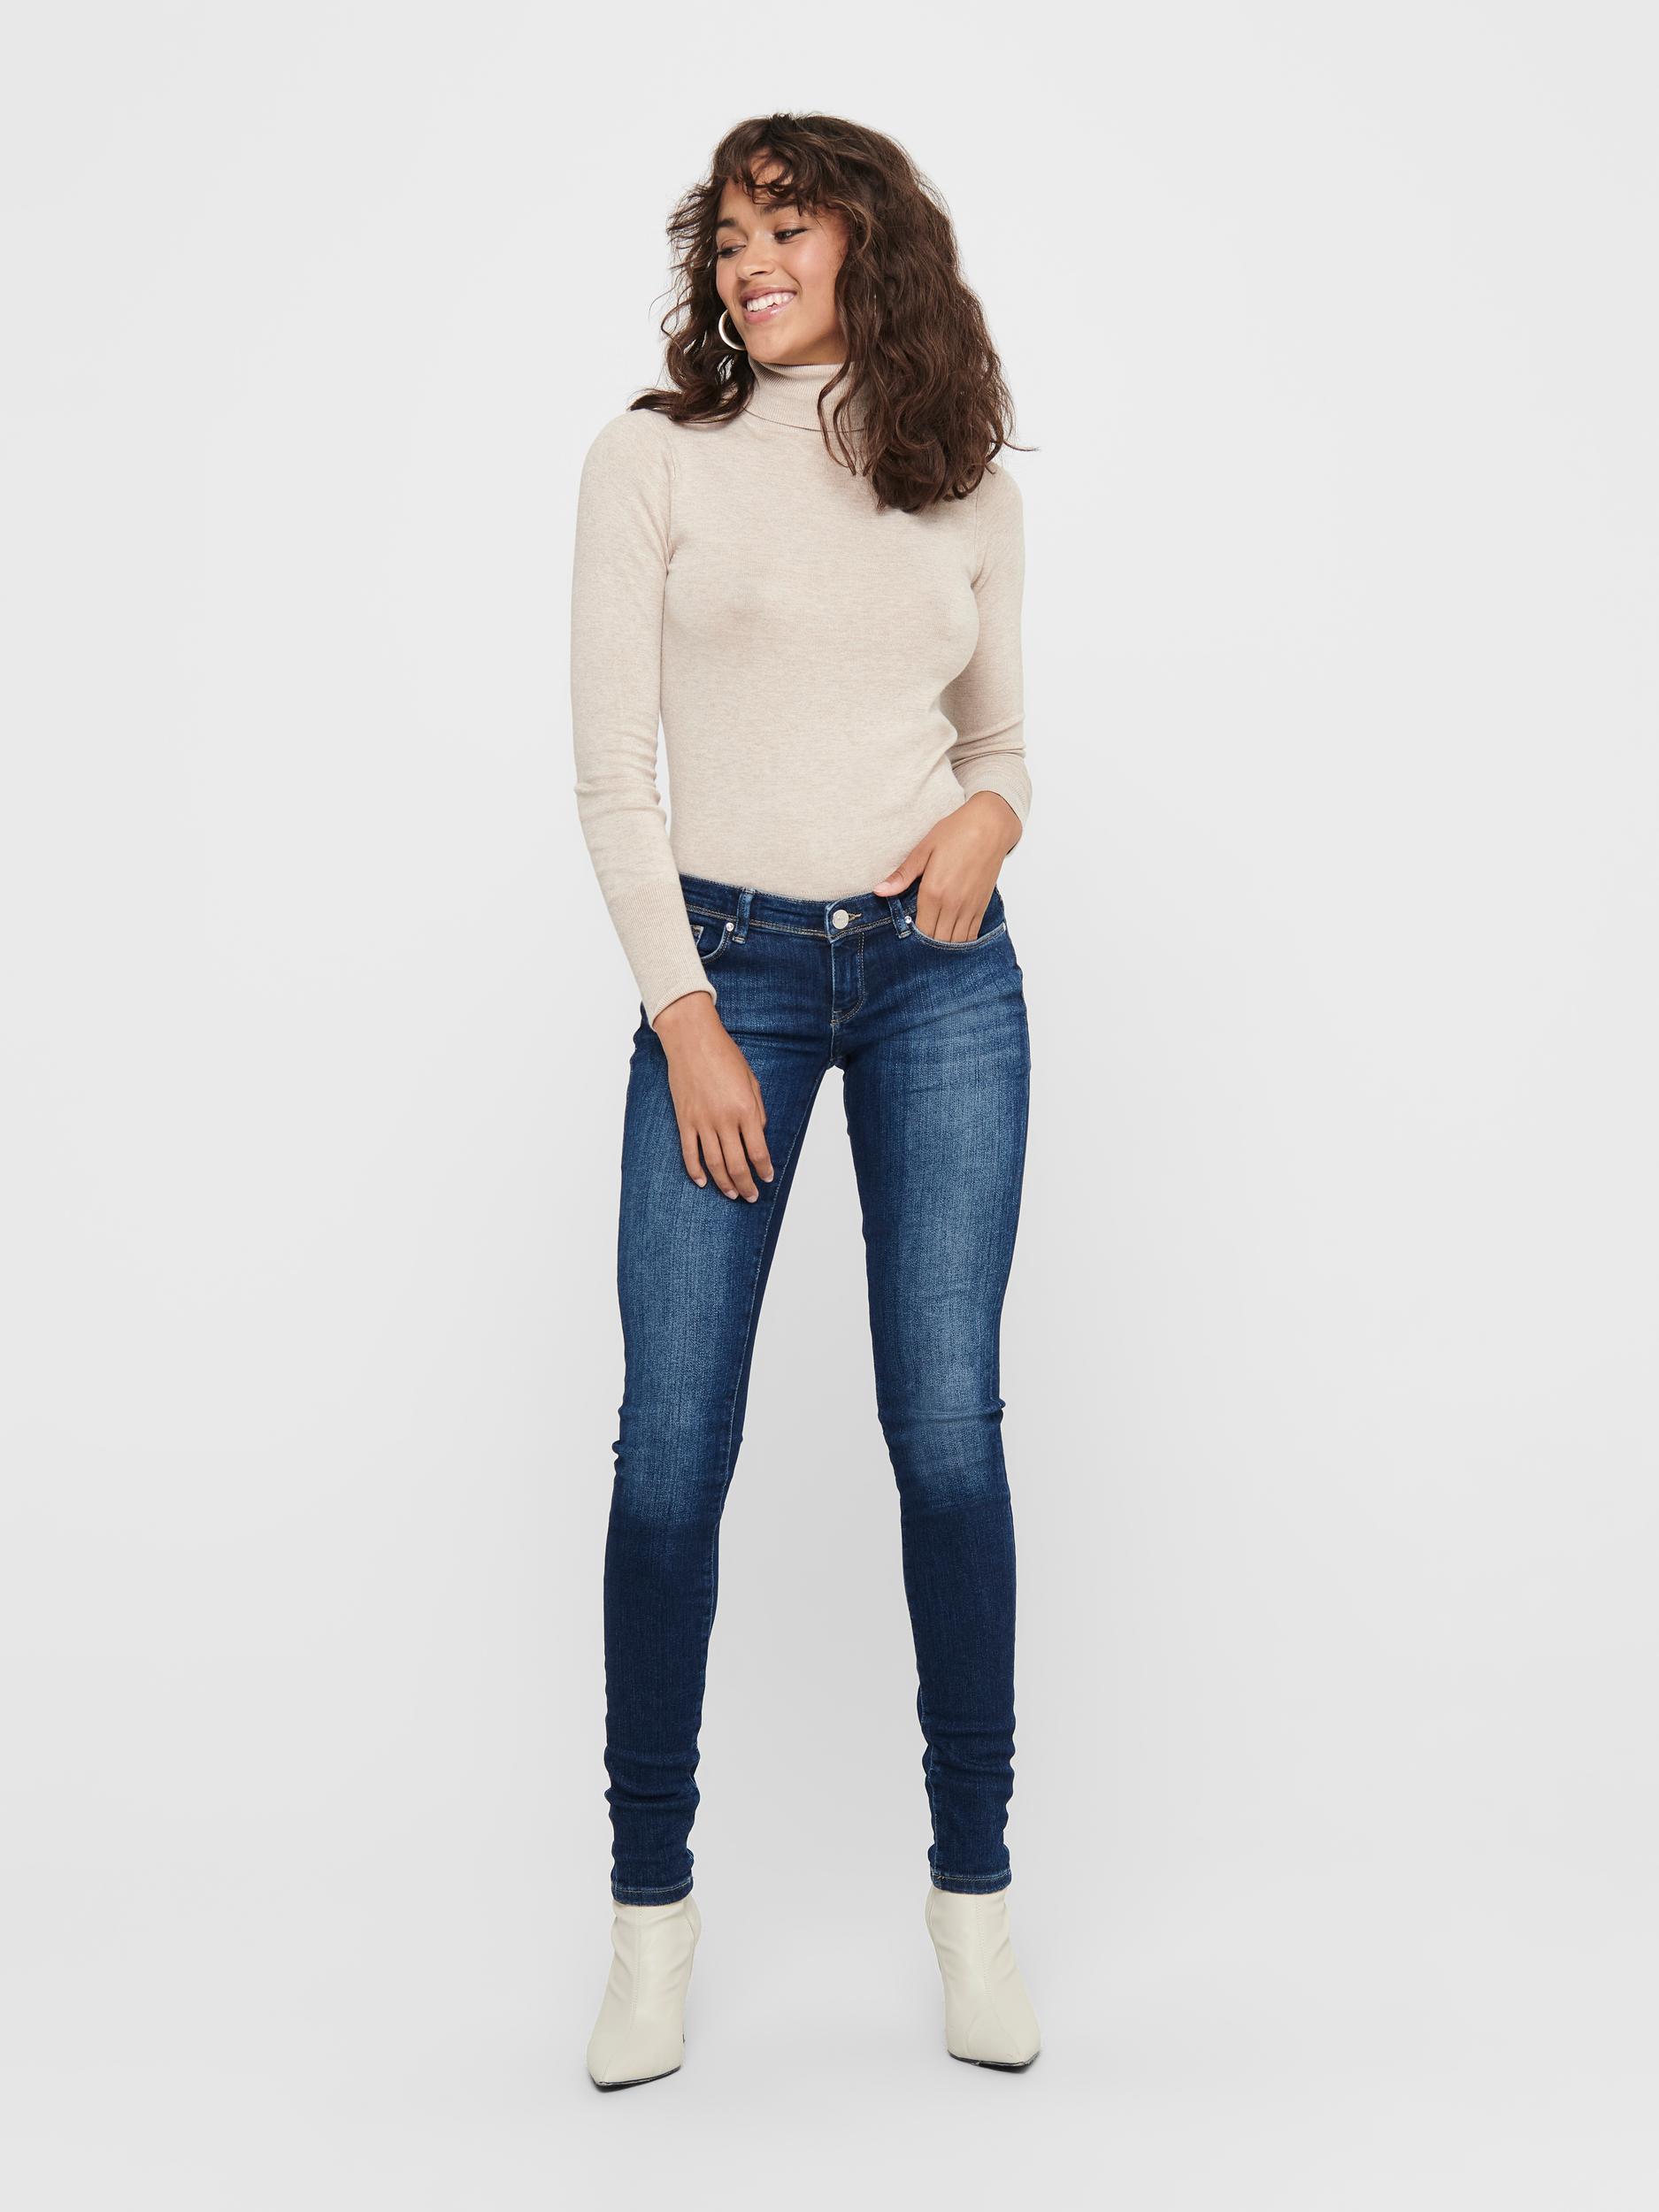 ONLY Jeans Coral in Blau 